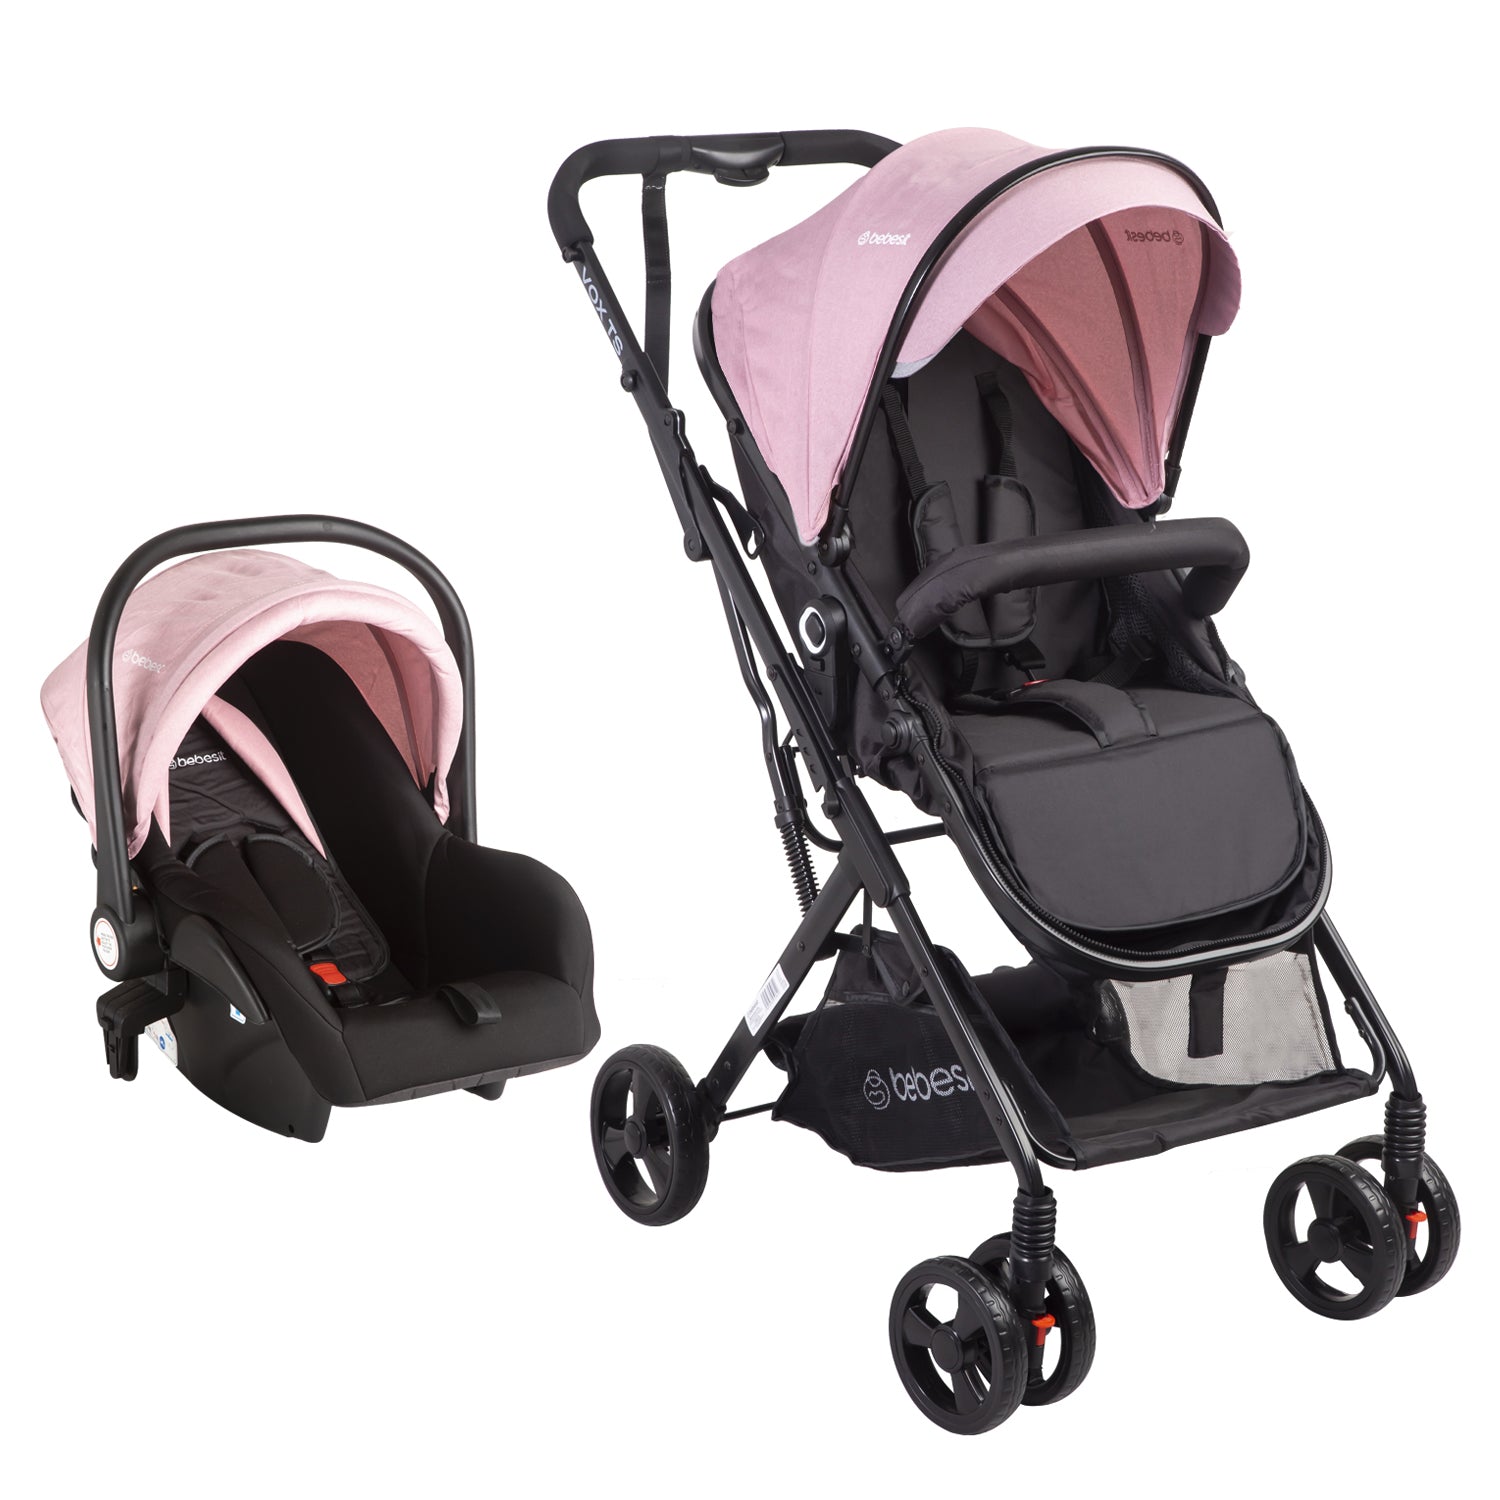 Coche Cuna travel system Vox Rosa